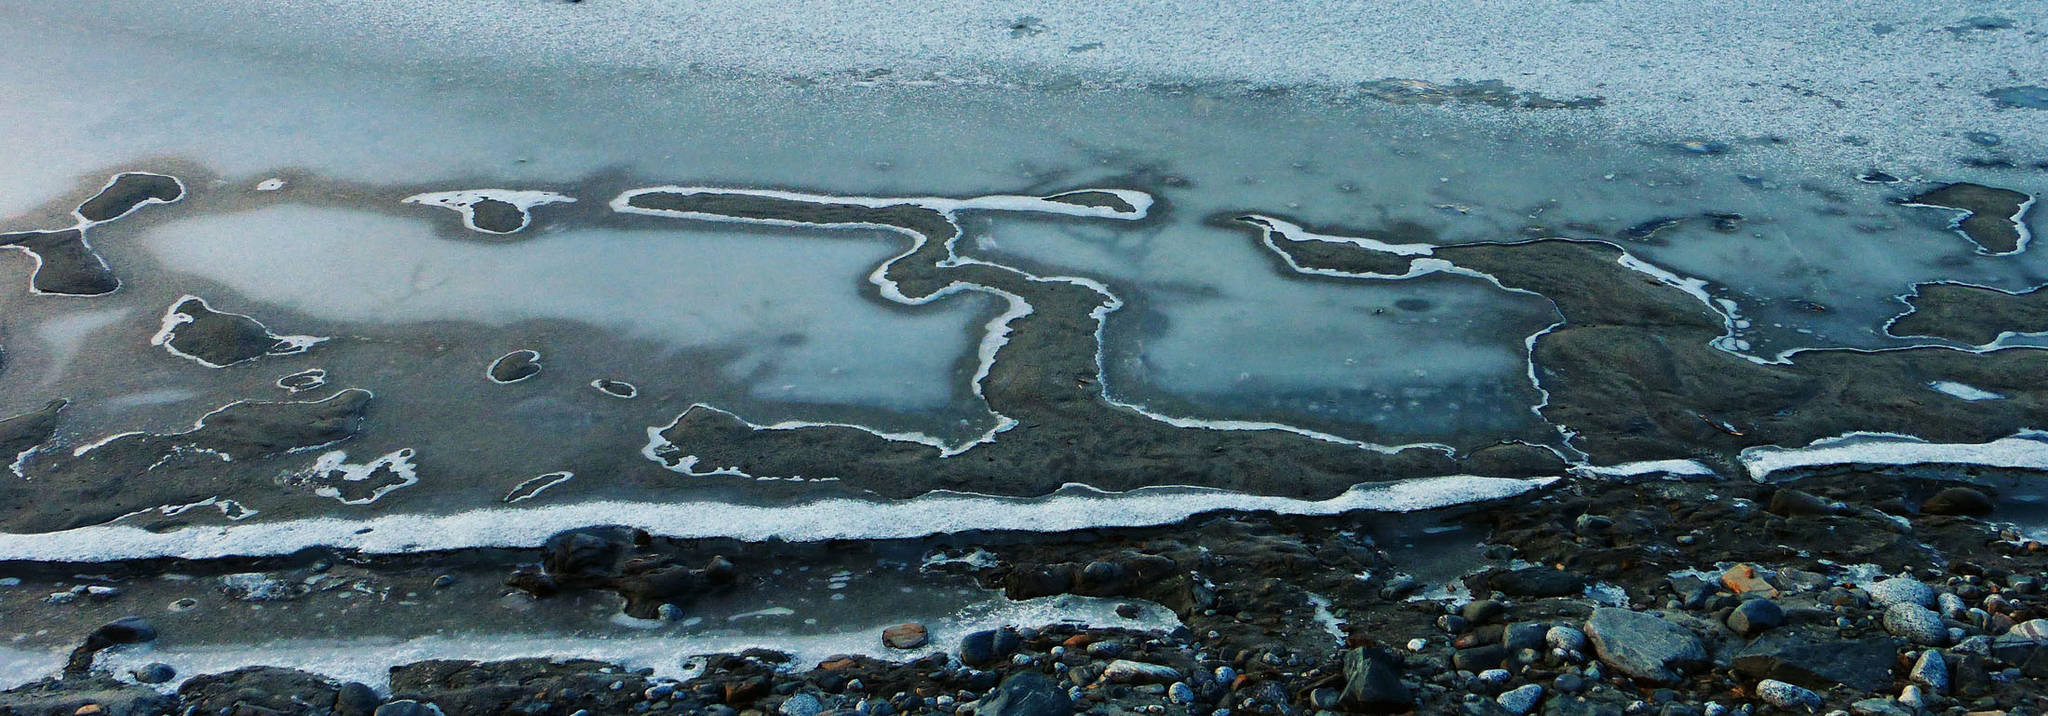 Shoreline designs in the Mendenhall Lake ice. Photo by Denise Carroll.